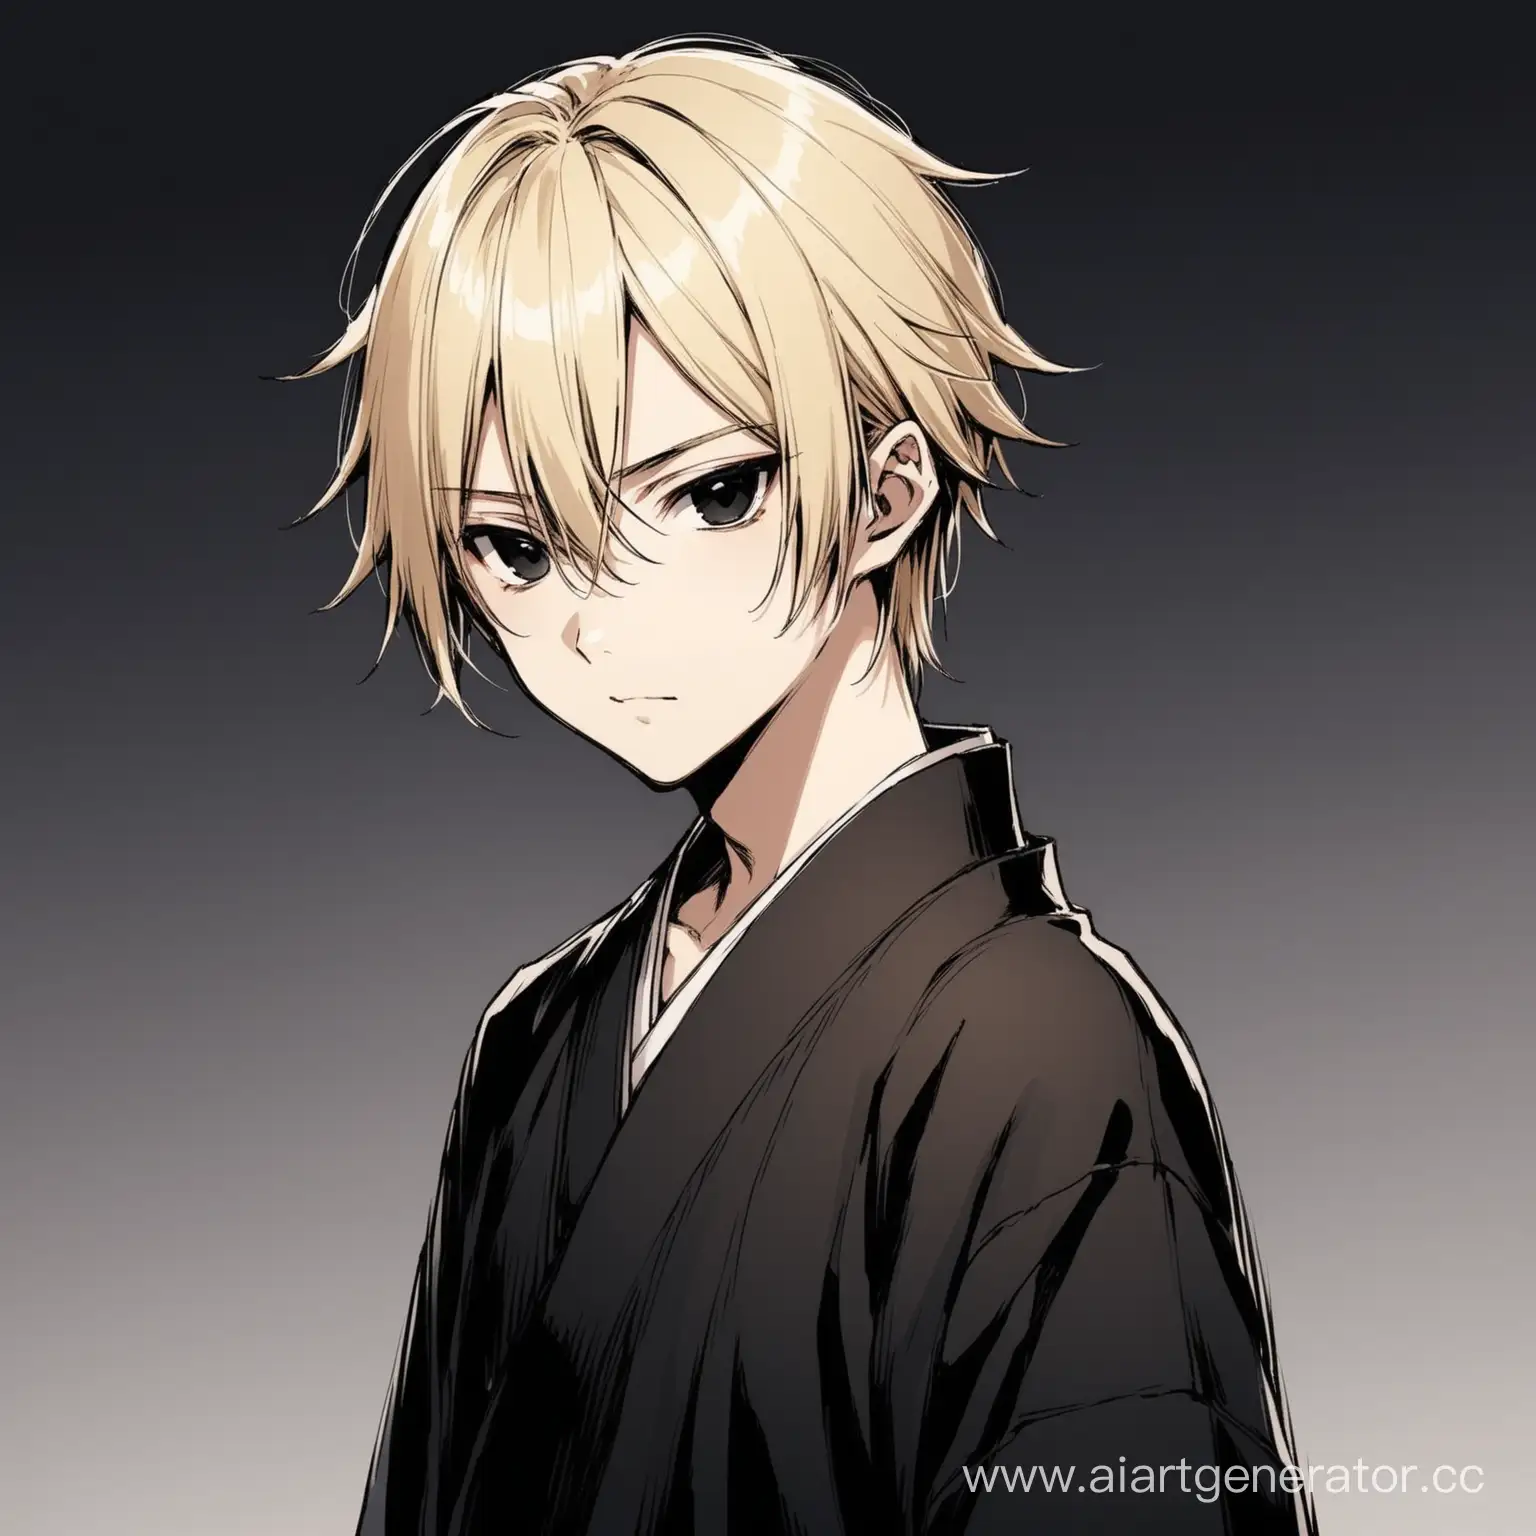 Japanese-Boy-in-Ouji-Style-Clothes-with-Blond-Hair-and-Black-Eyes